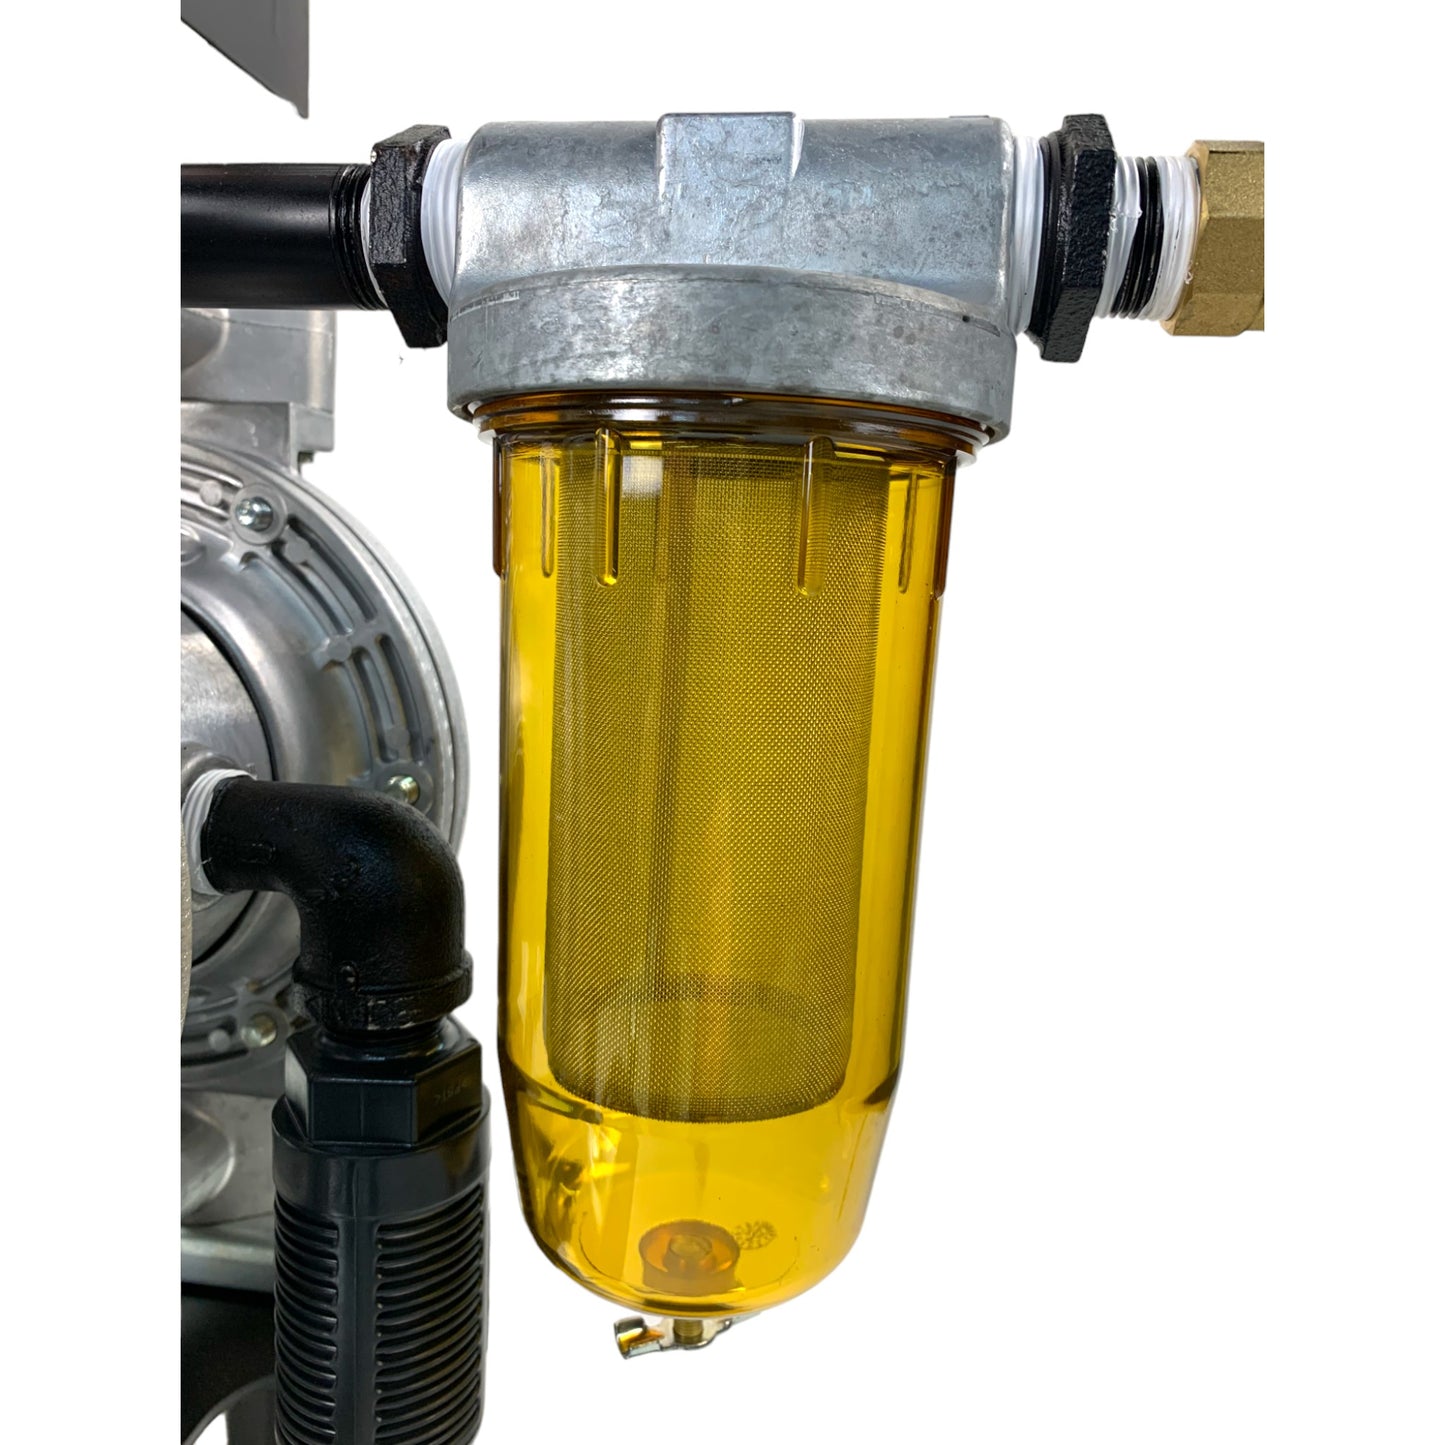 WEN100TS Accelerator Mobile Fluid Transfer System with Heavy Duty Diaphragm Air Pump - Oil